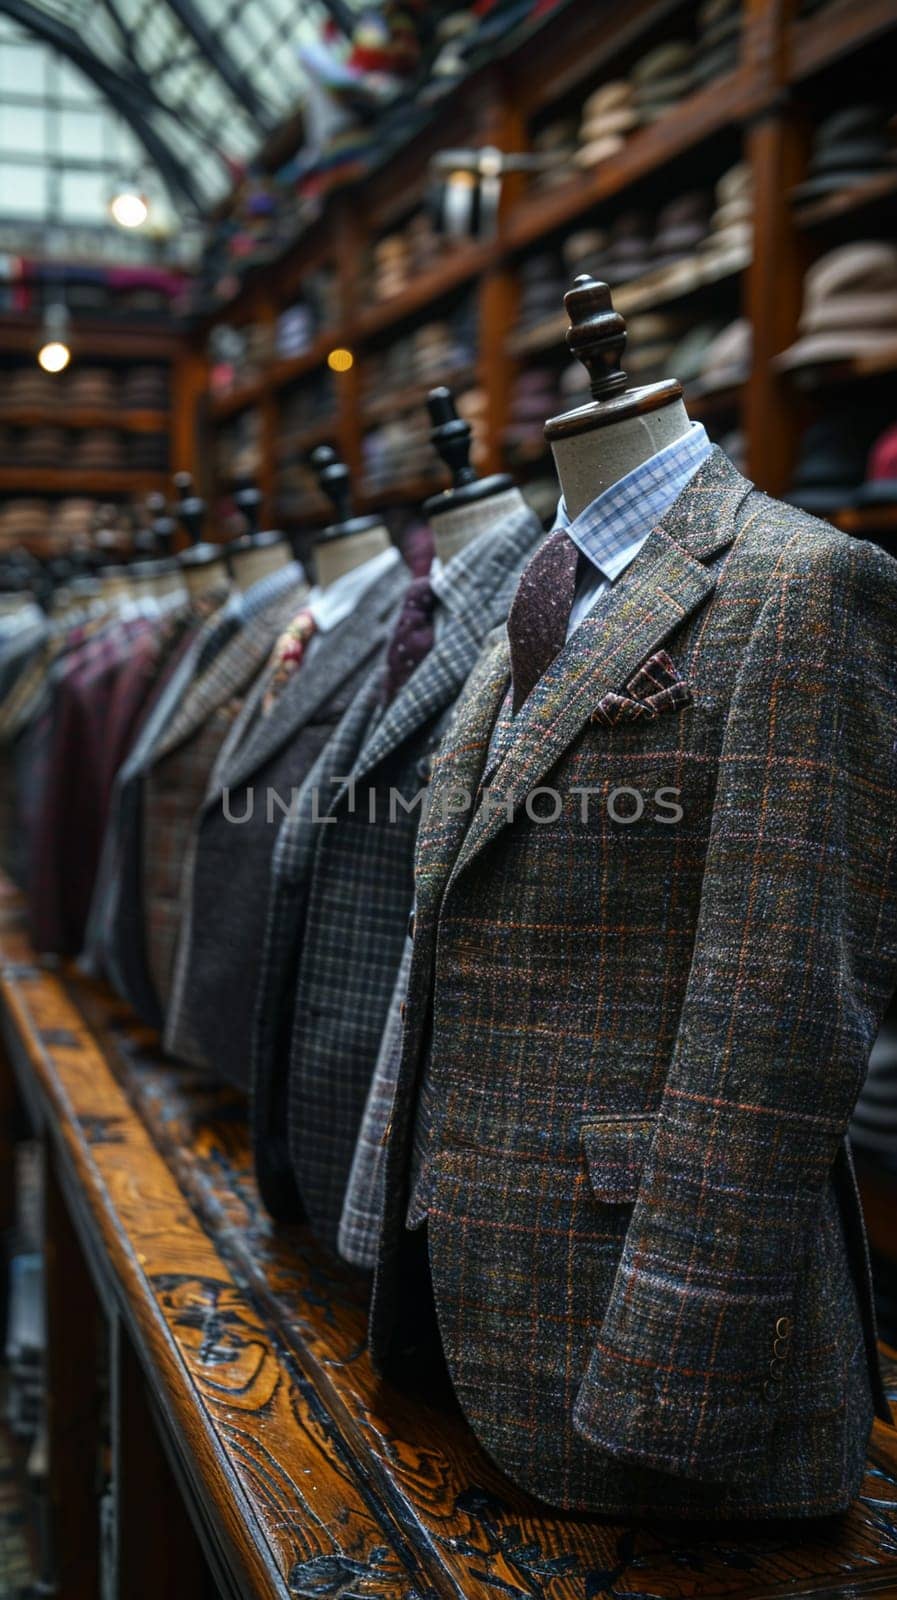 Tailored Suit Studio Sews Professionalism in Business of Custom Attire, Measuring tapes and suit fabrics sew a narrative of professionalism and elegance in the tailored suit studio business.